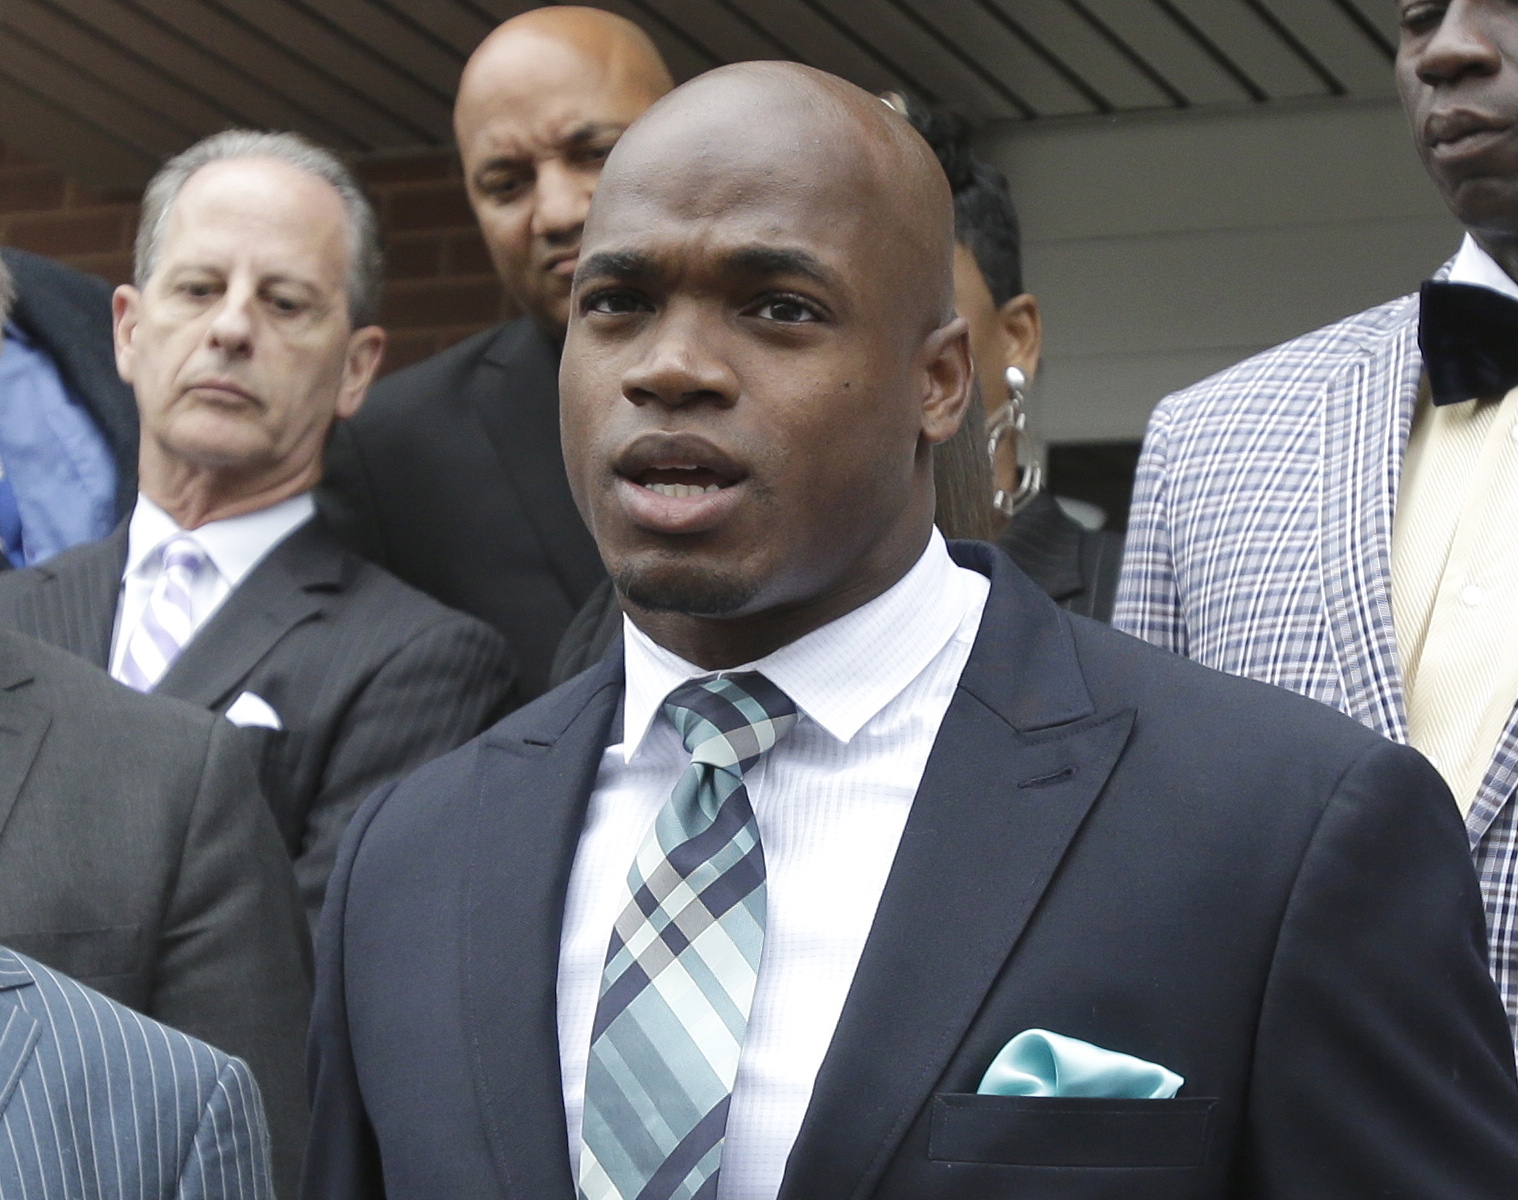 Minnesota Vikings running back Adrian Peterson speaks to the media after pleading no contest to an assault charge in Conroe, Texas, in NOvember.